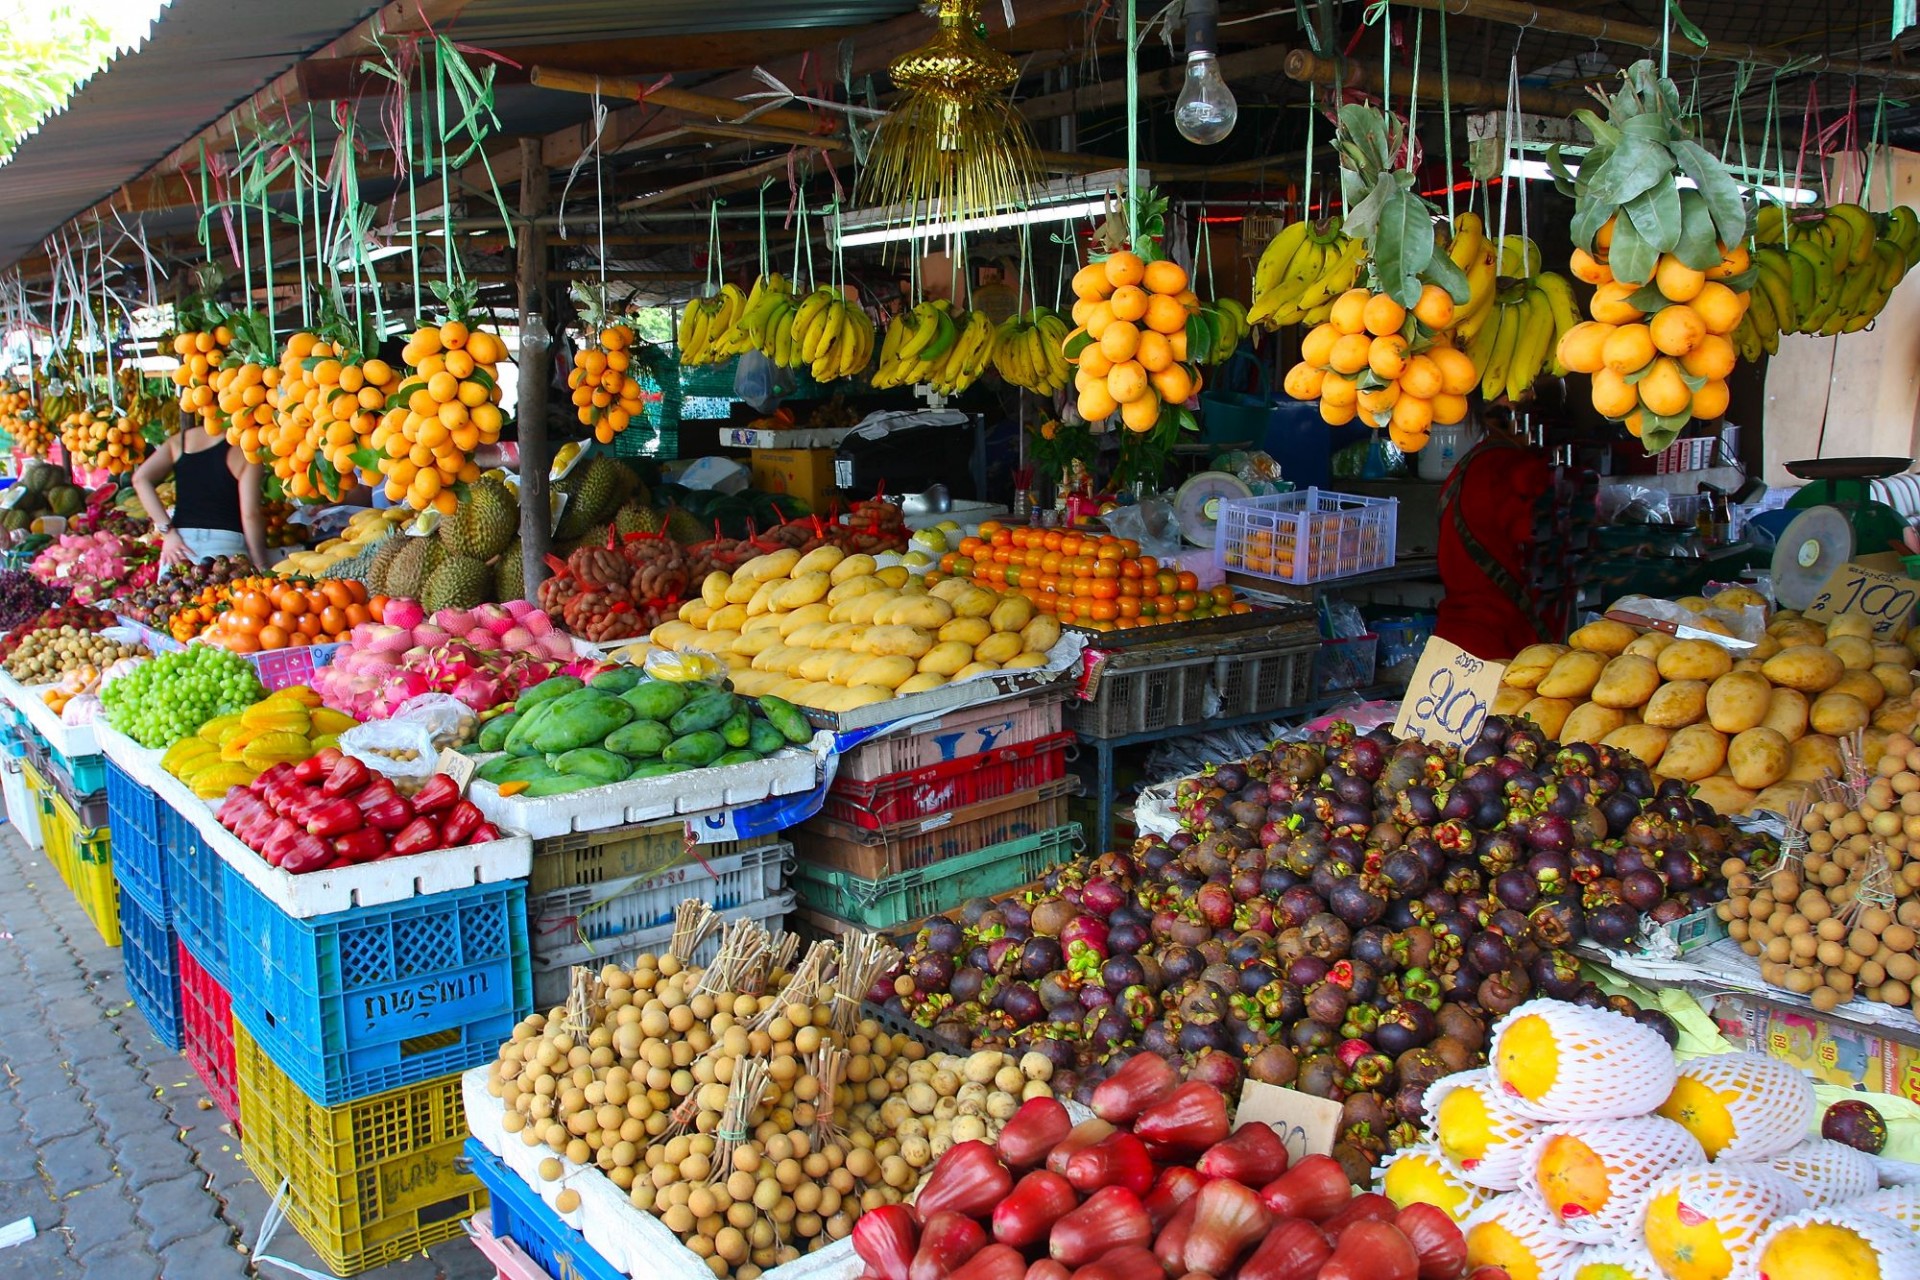 open market filled with a wide variety of fruits and vegetables